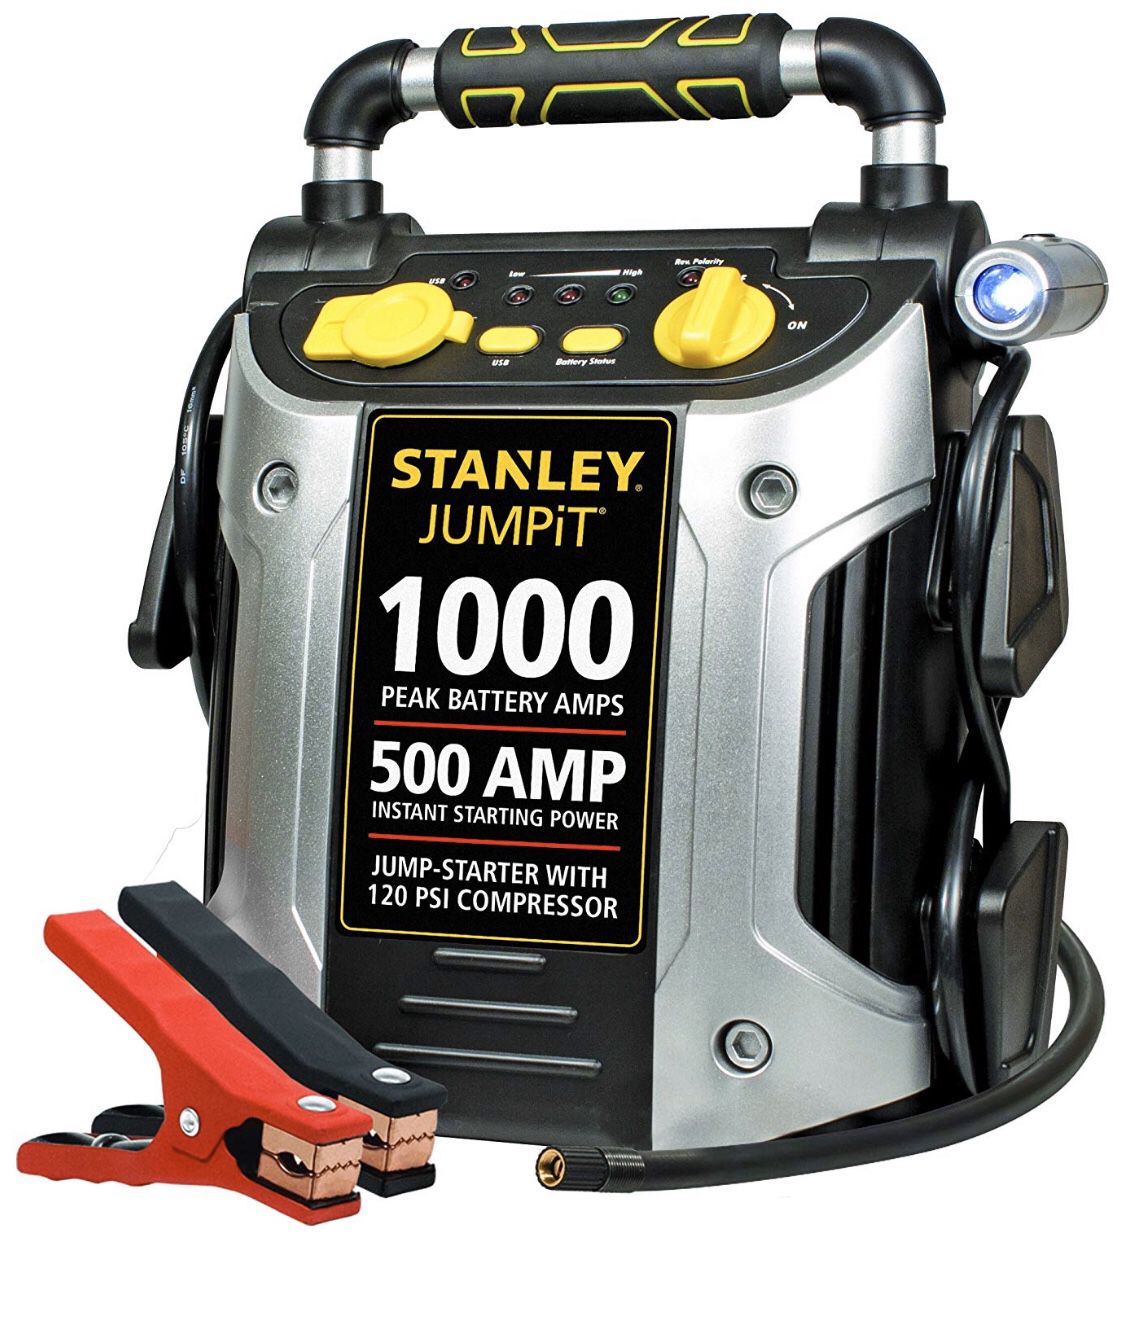 STANLEY J5C09 Power Station Jump Starter, Air Compressor, Battery Clamps